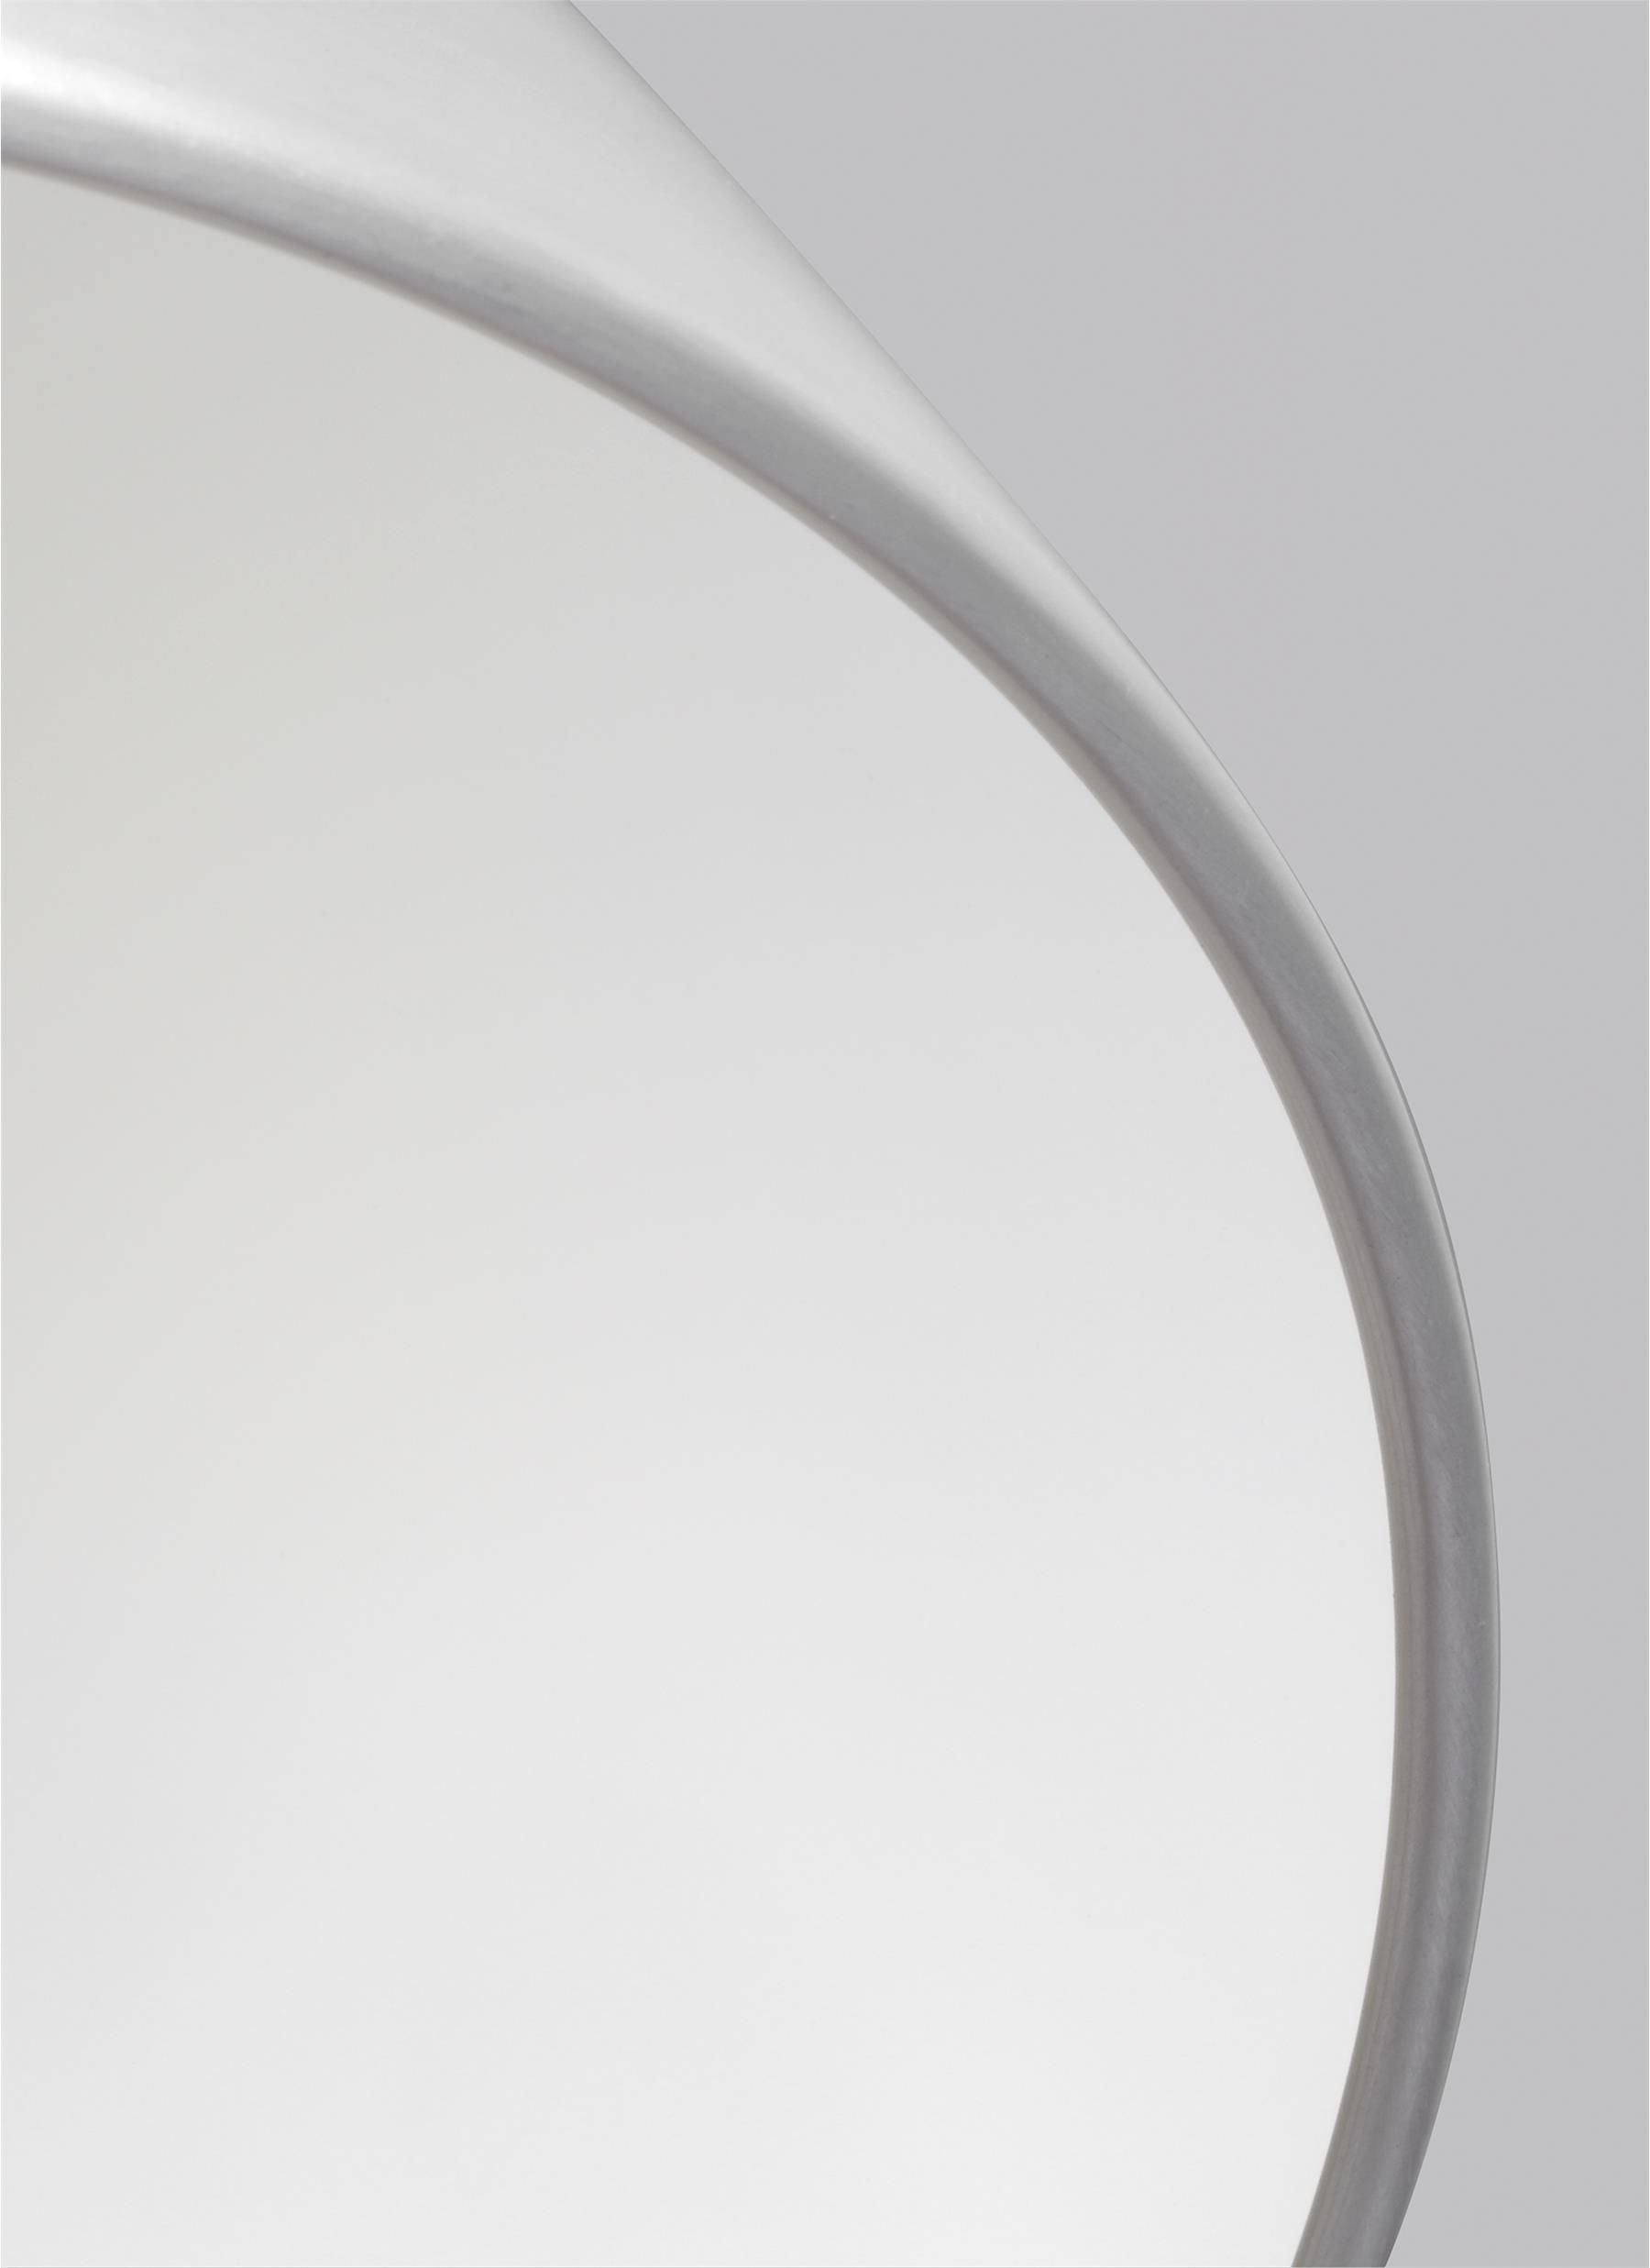 Brynne Pendant Stainless steel INTEGRATED LED - P1443SN-L1 | SEAN LAVIN